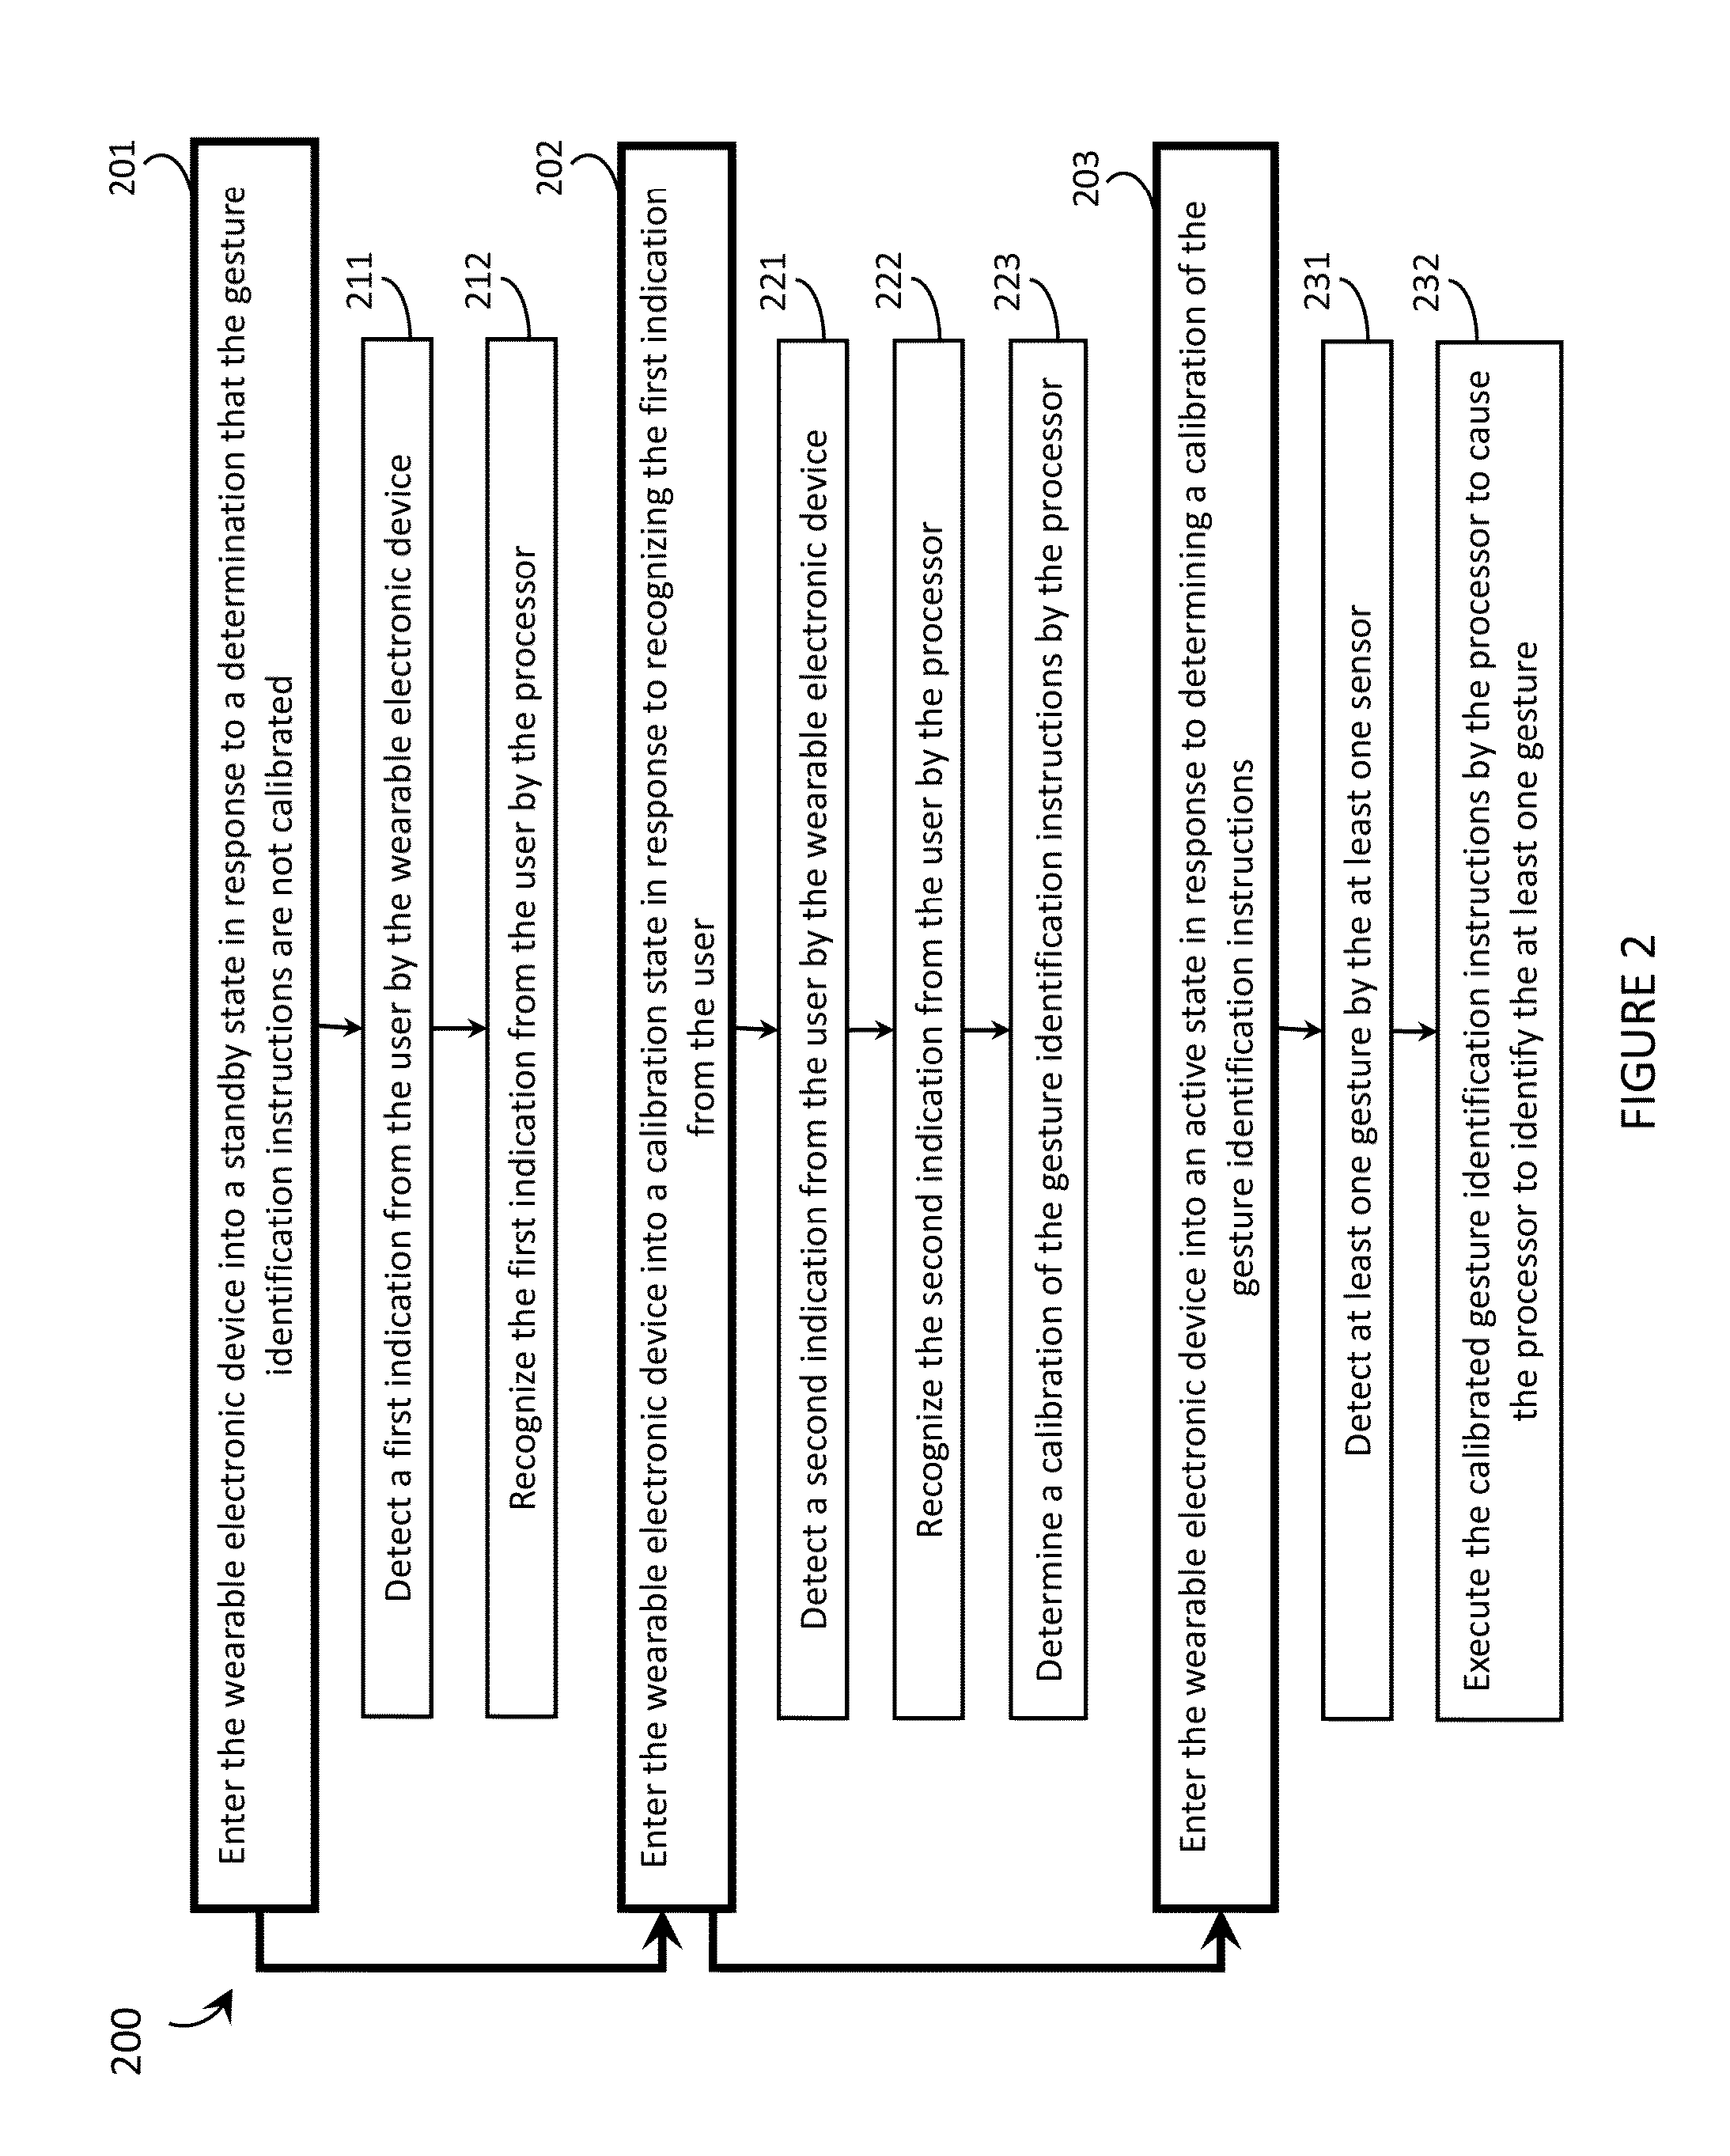 Systems, devices, and methods for wearable electronic devices such as state machines